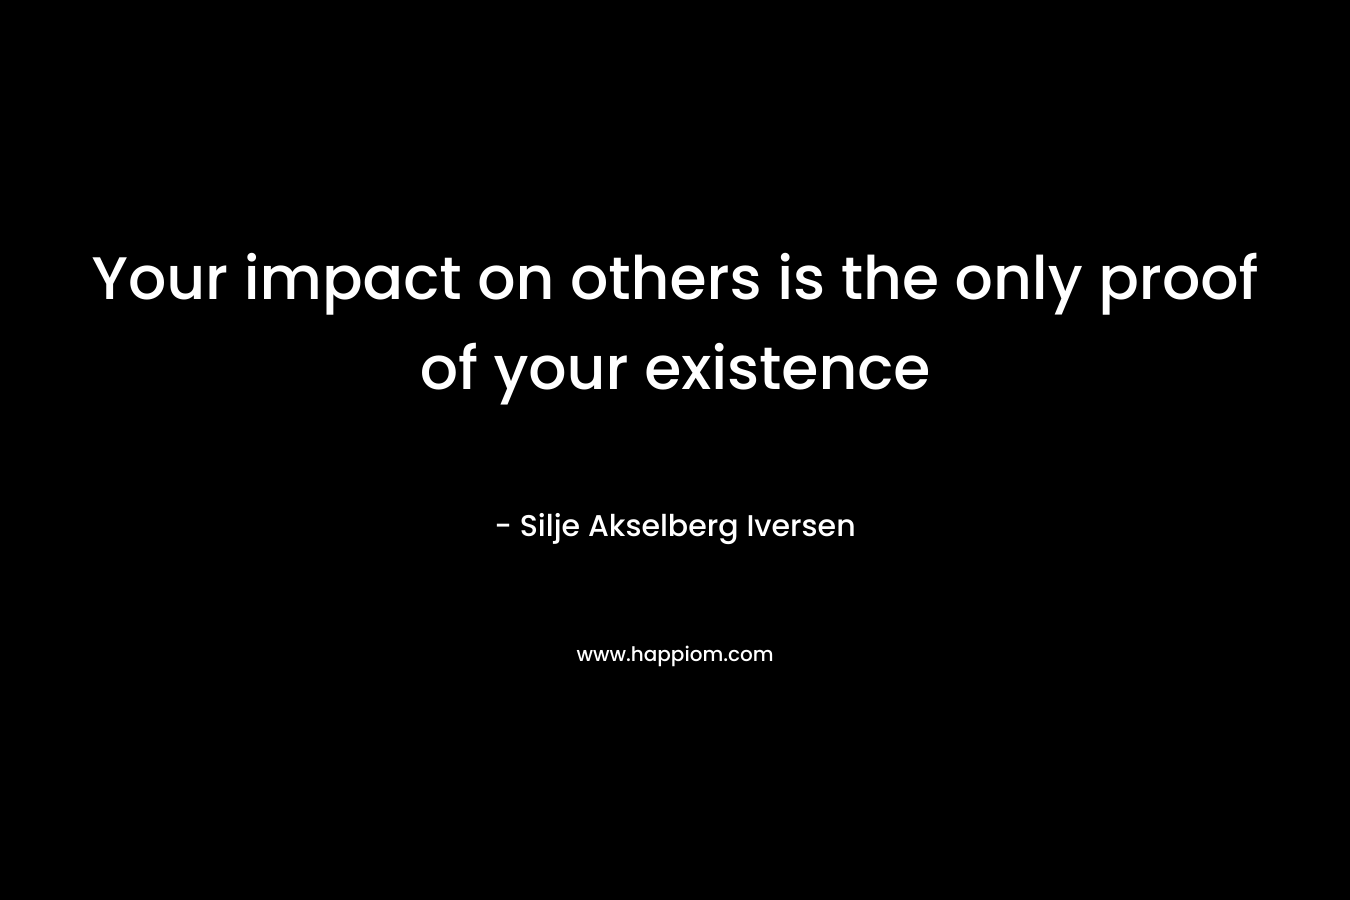 Your impact on others is the only proof of your existence